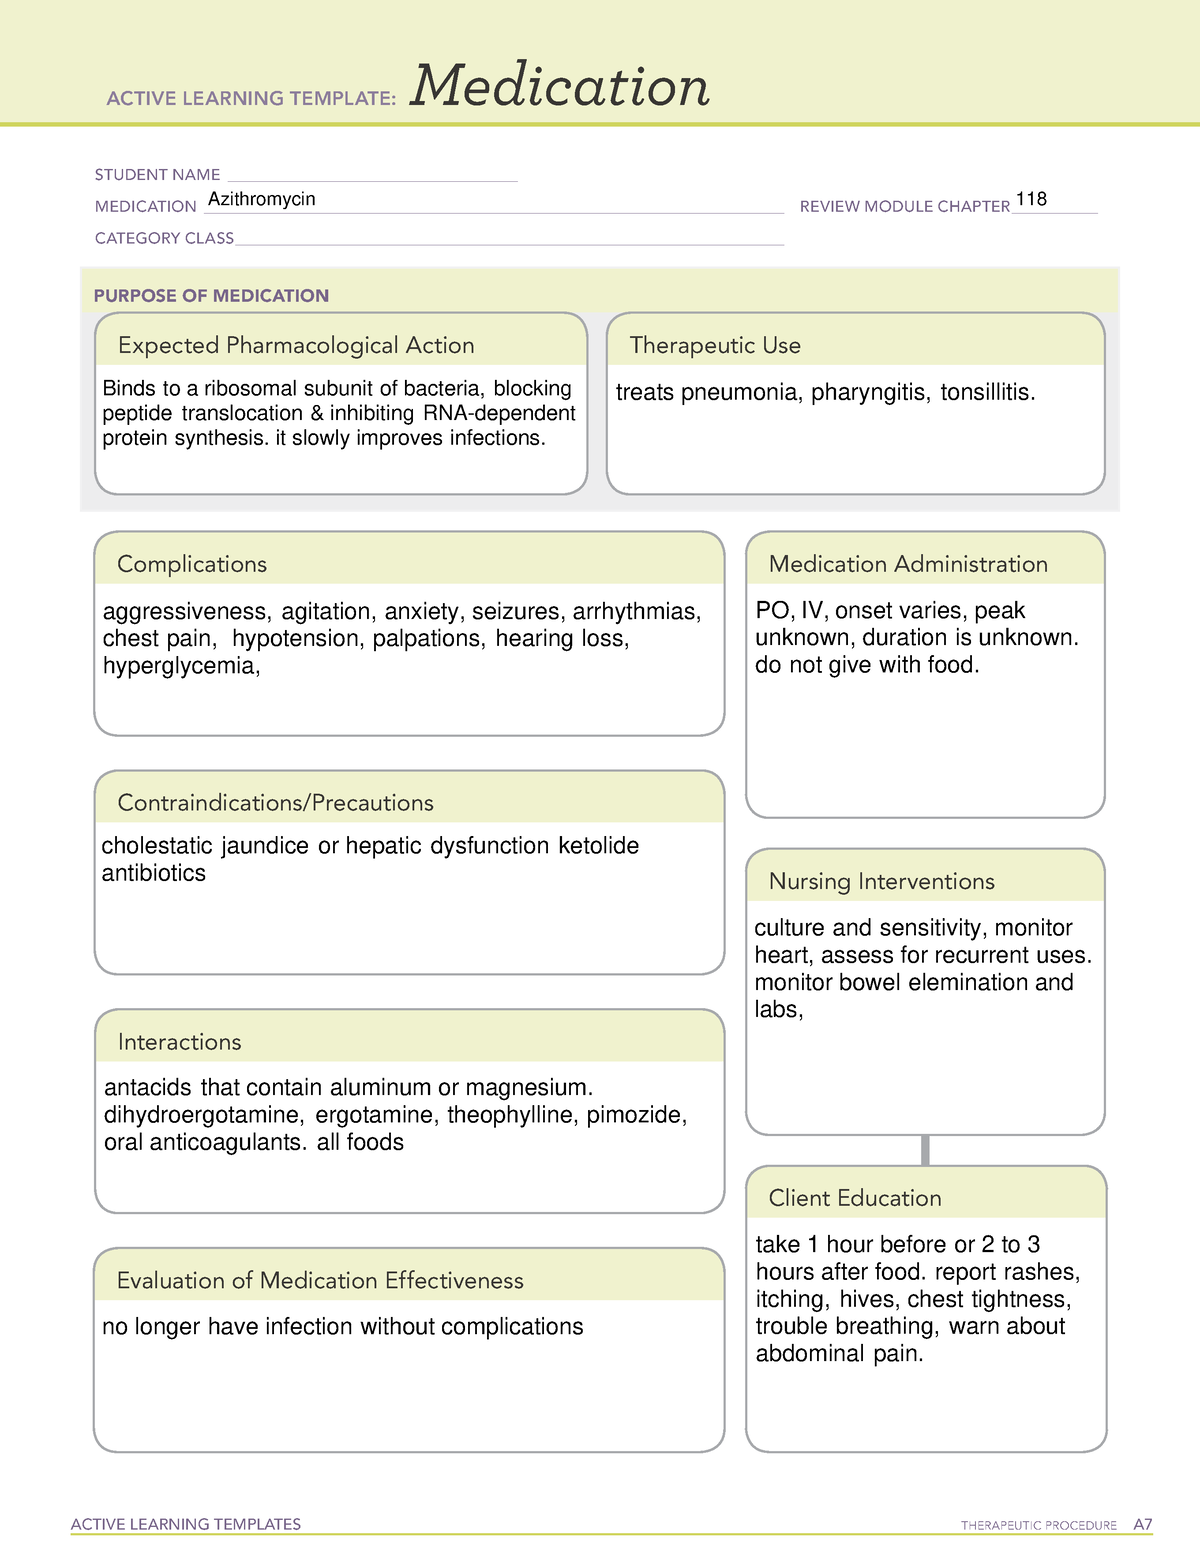 Azithromycin Med card ACTIVE LEARNING TEMPLATES THERAPEUTIC